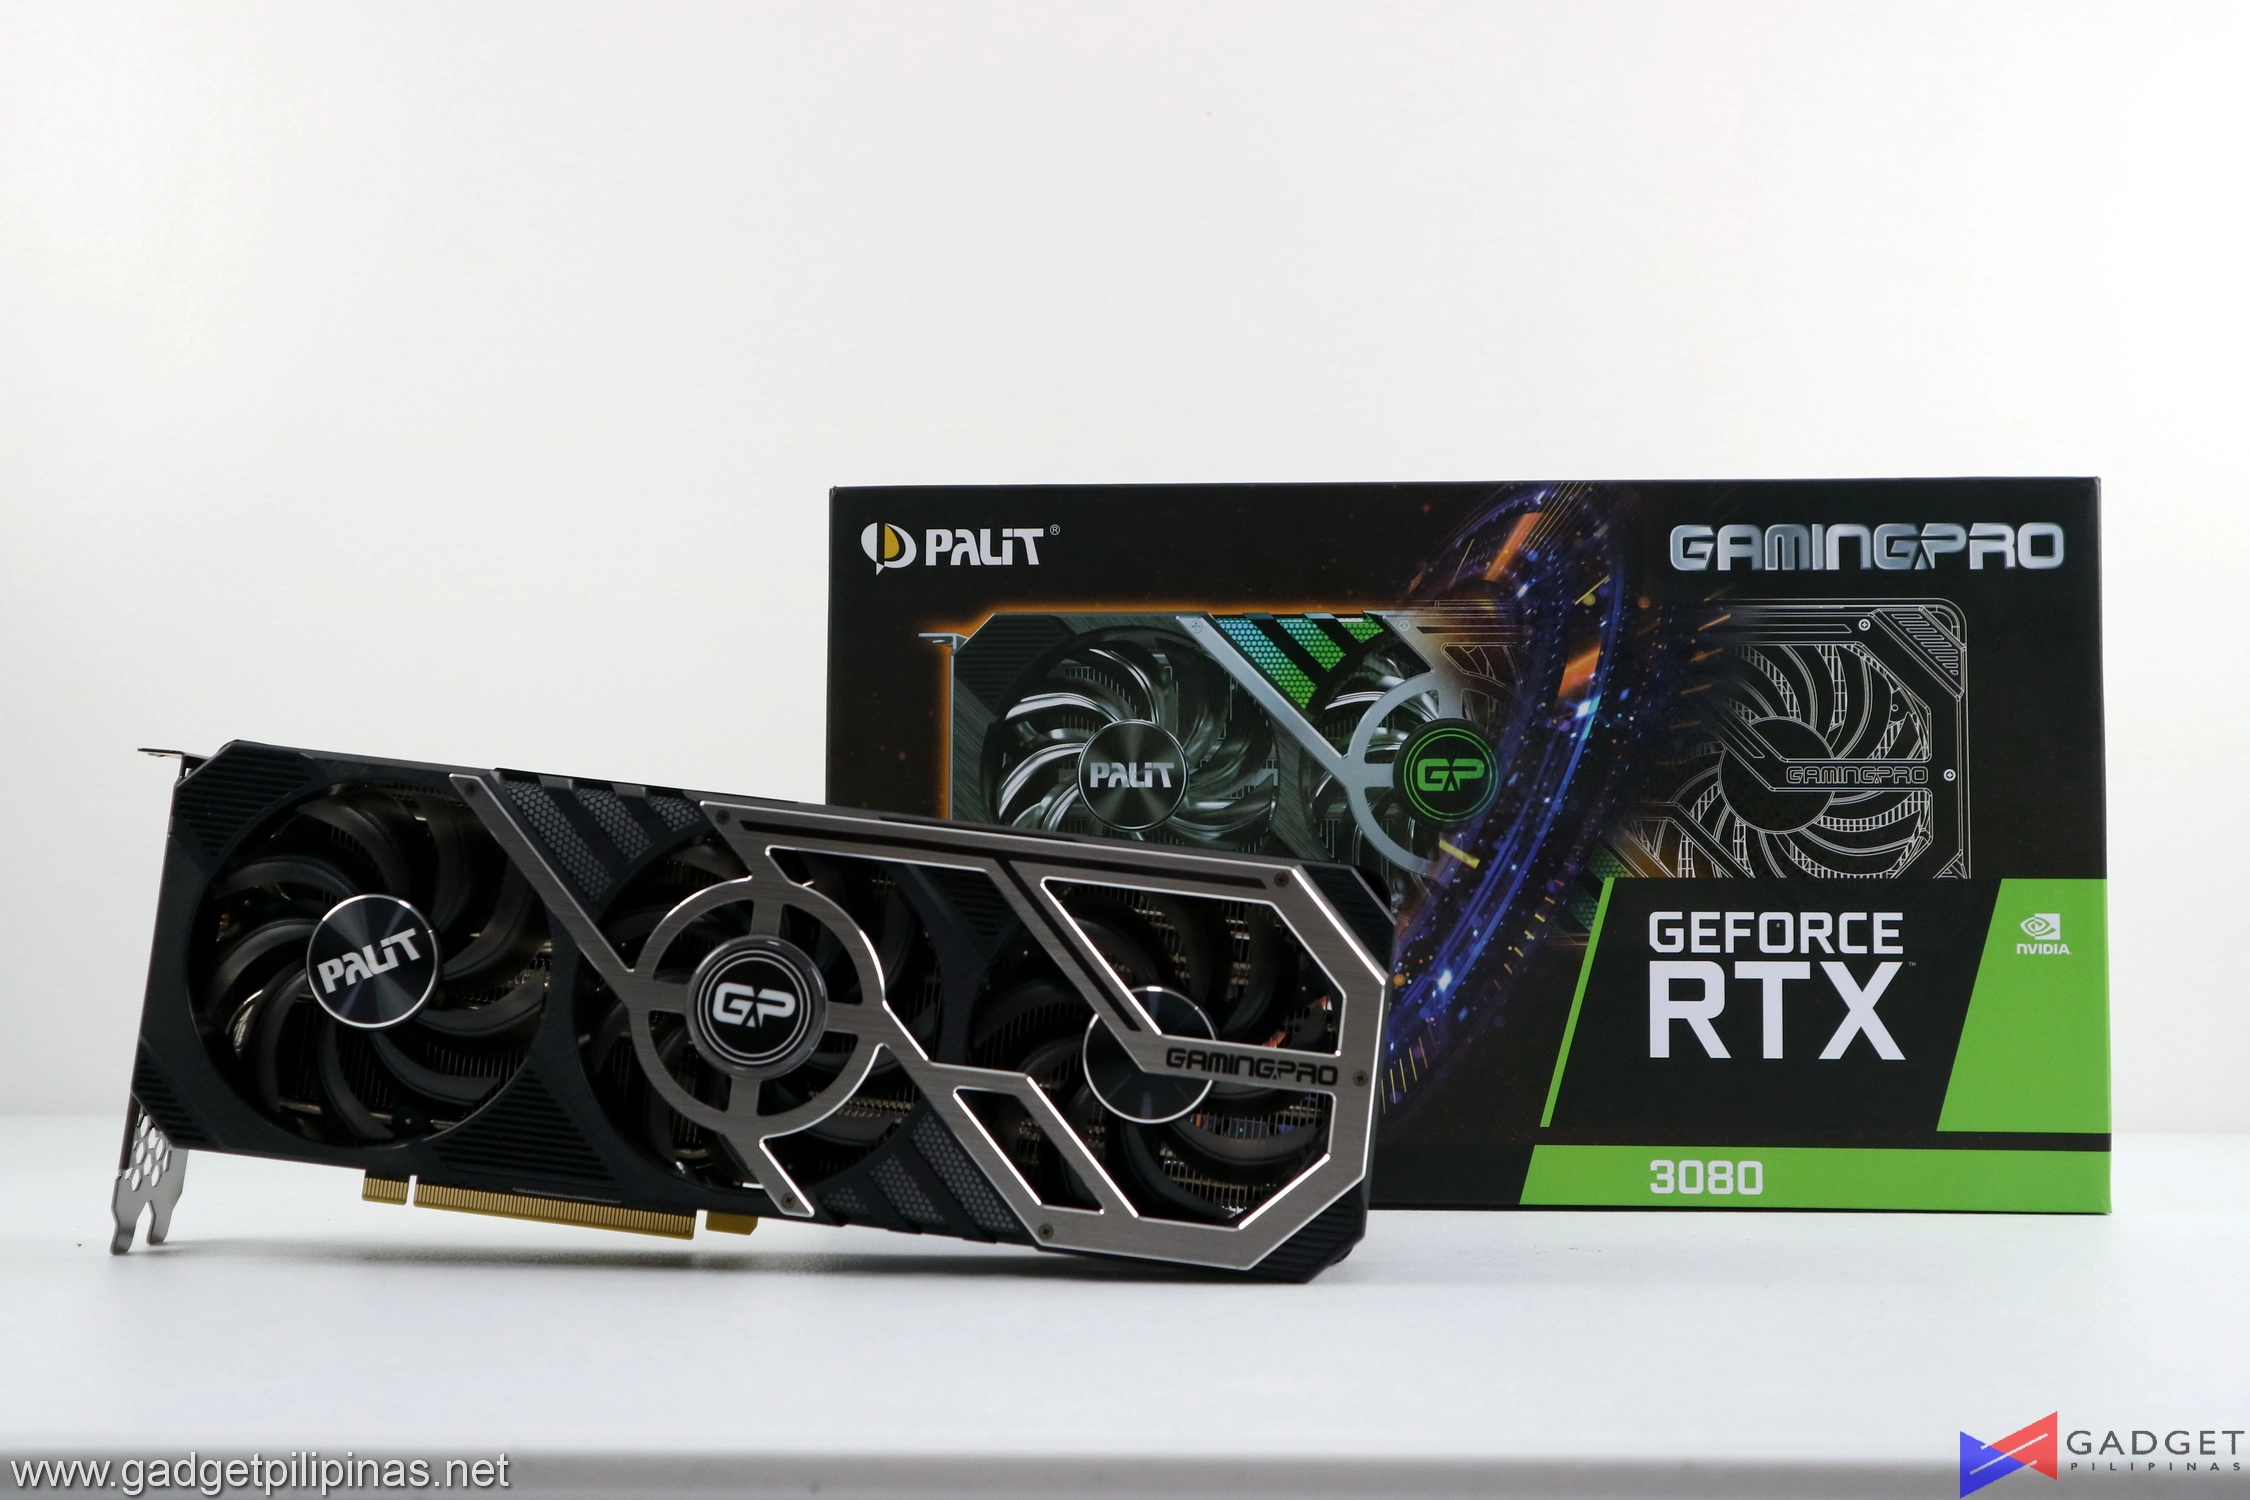 Palit GeForce RTX 3080 Gaming Pro Graphics Card Review Gadget Pilipinas  Tech News, Reviews, Benchmarks and Build Guides